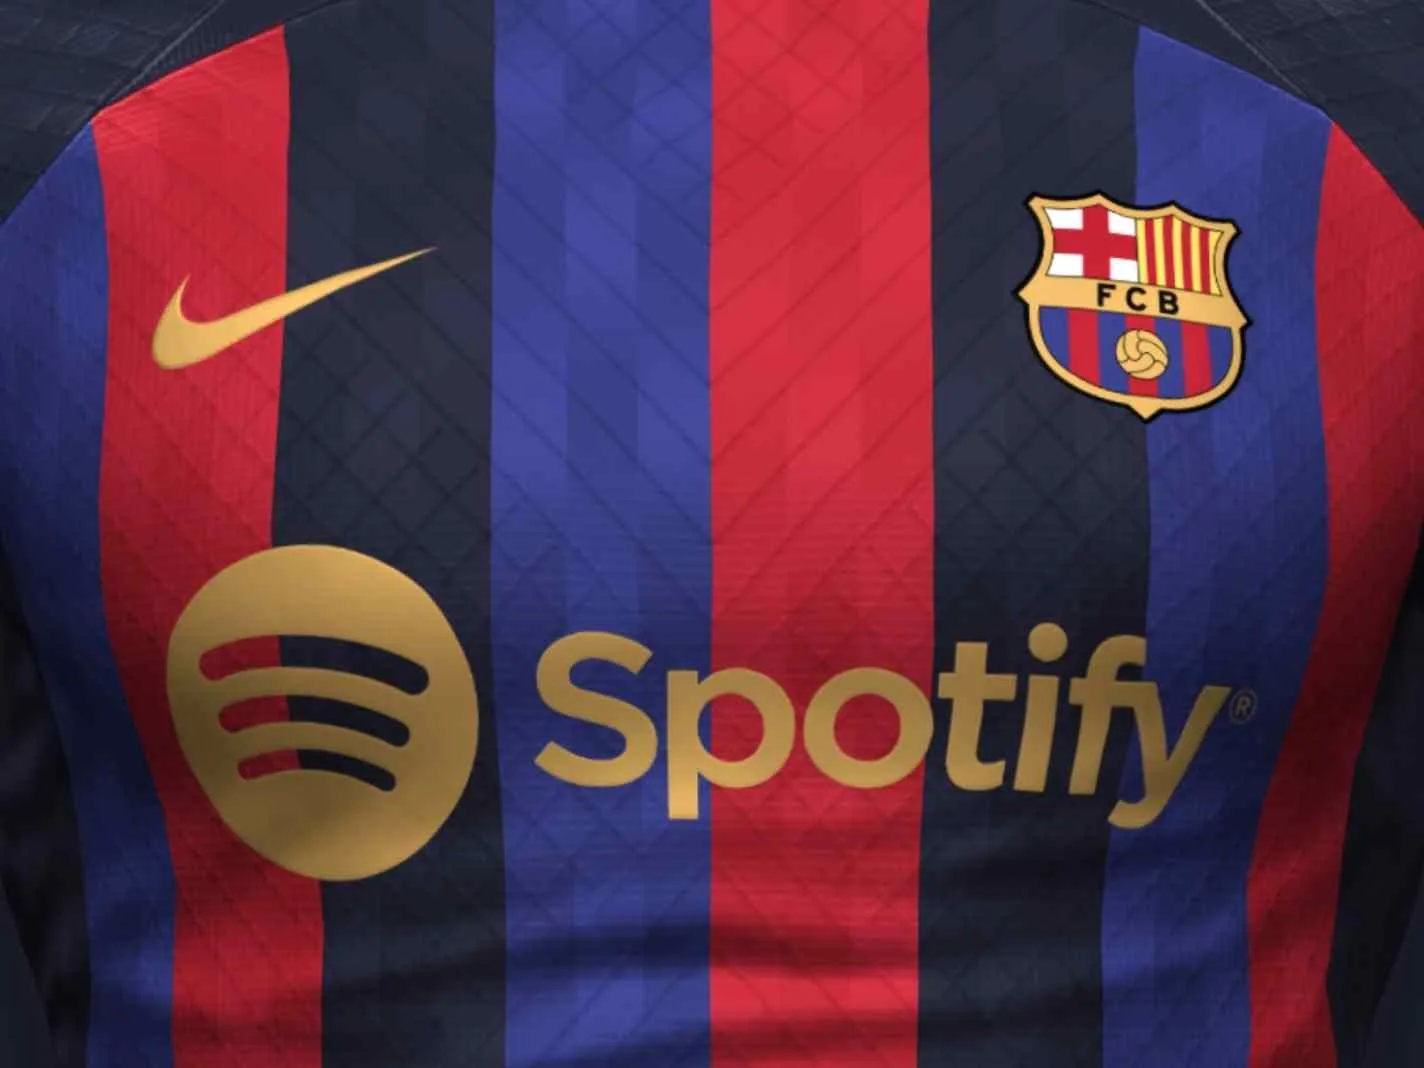 The photo shows the front part of the new Barcelona home kit for 22/23 season featuring Nike, Barcelona and Spotify logos.